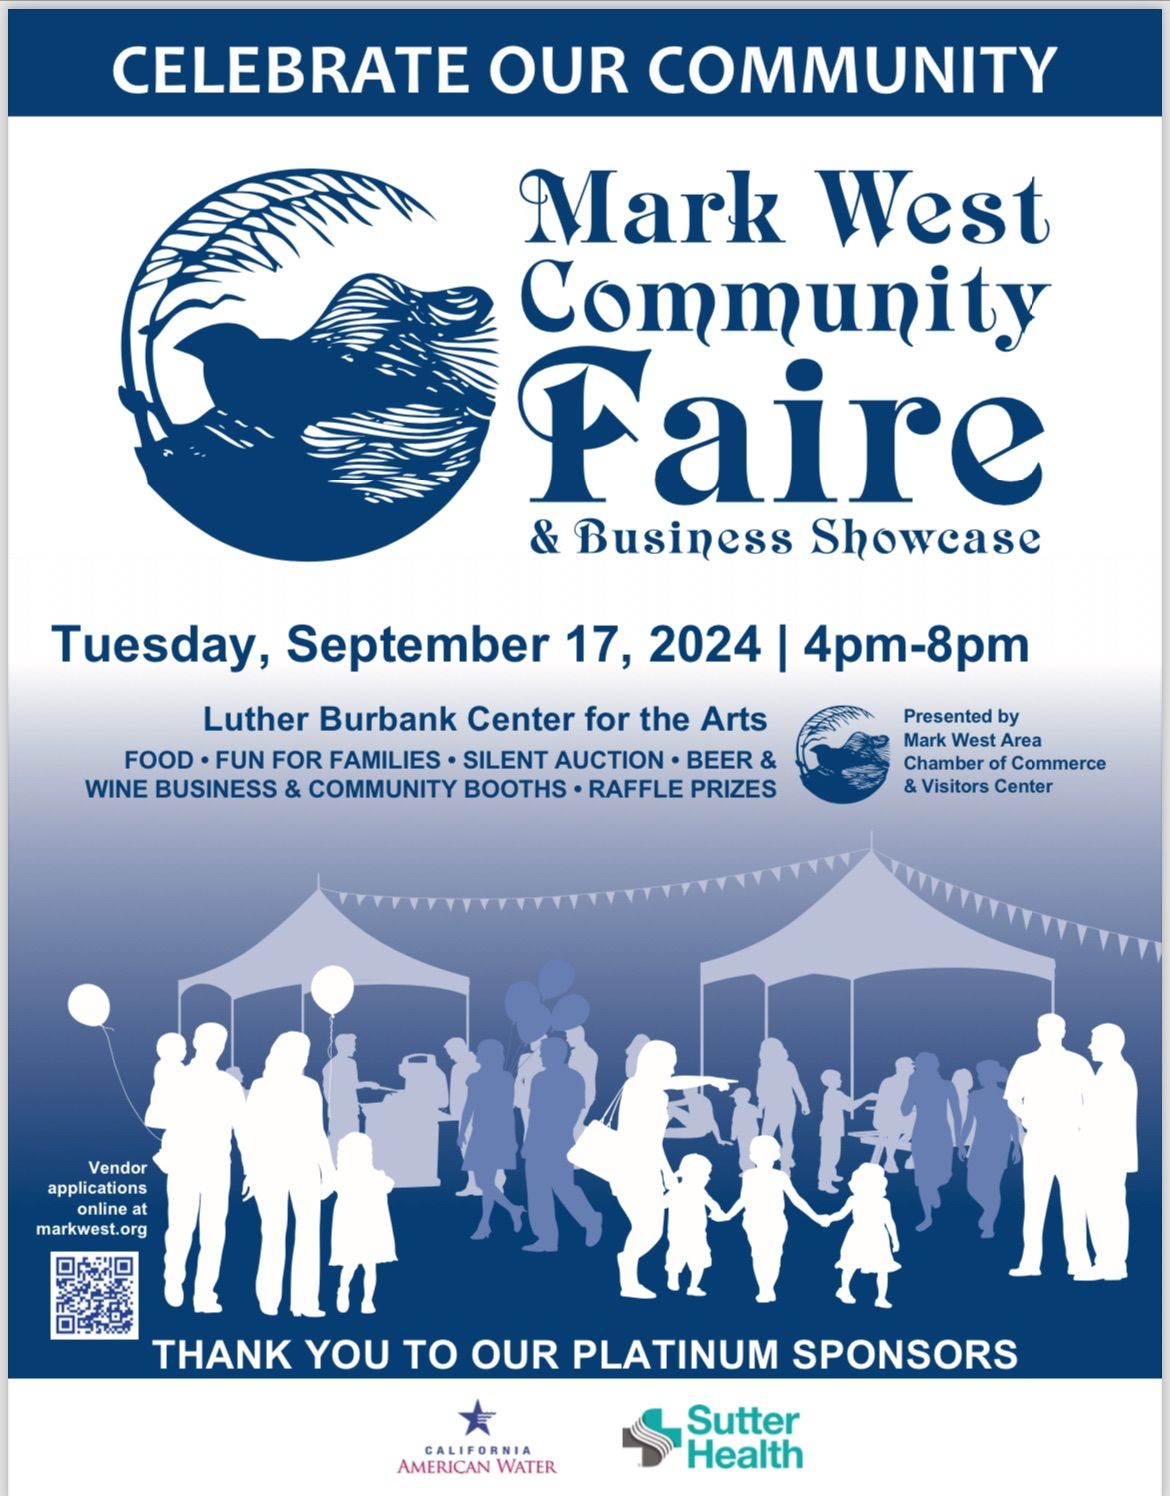 Mark West Community Faire and Business Showcase 